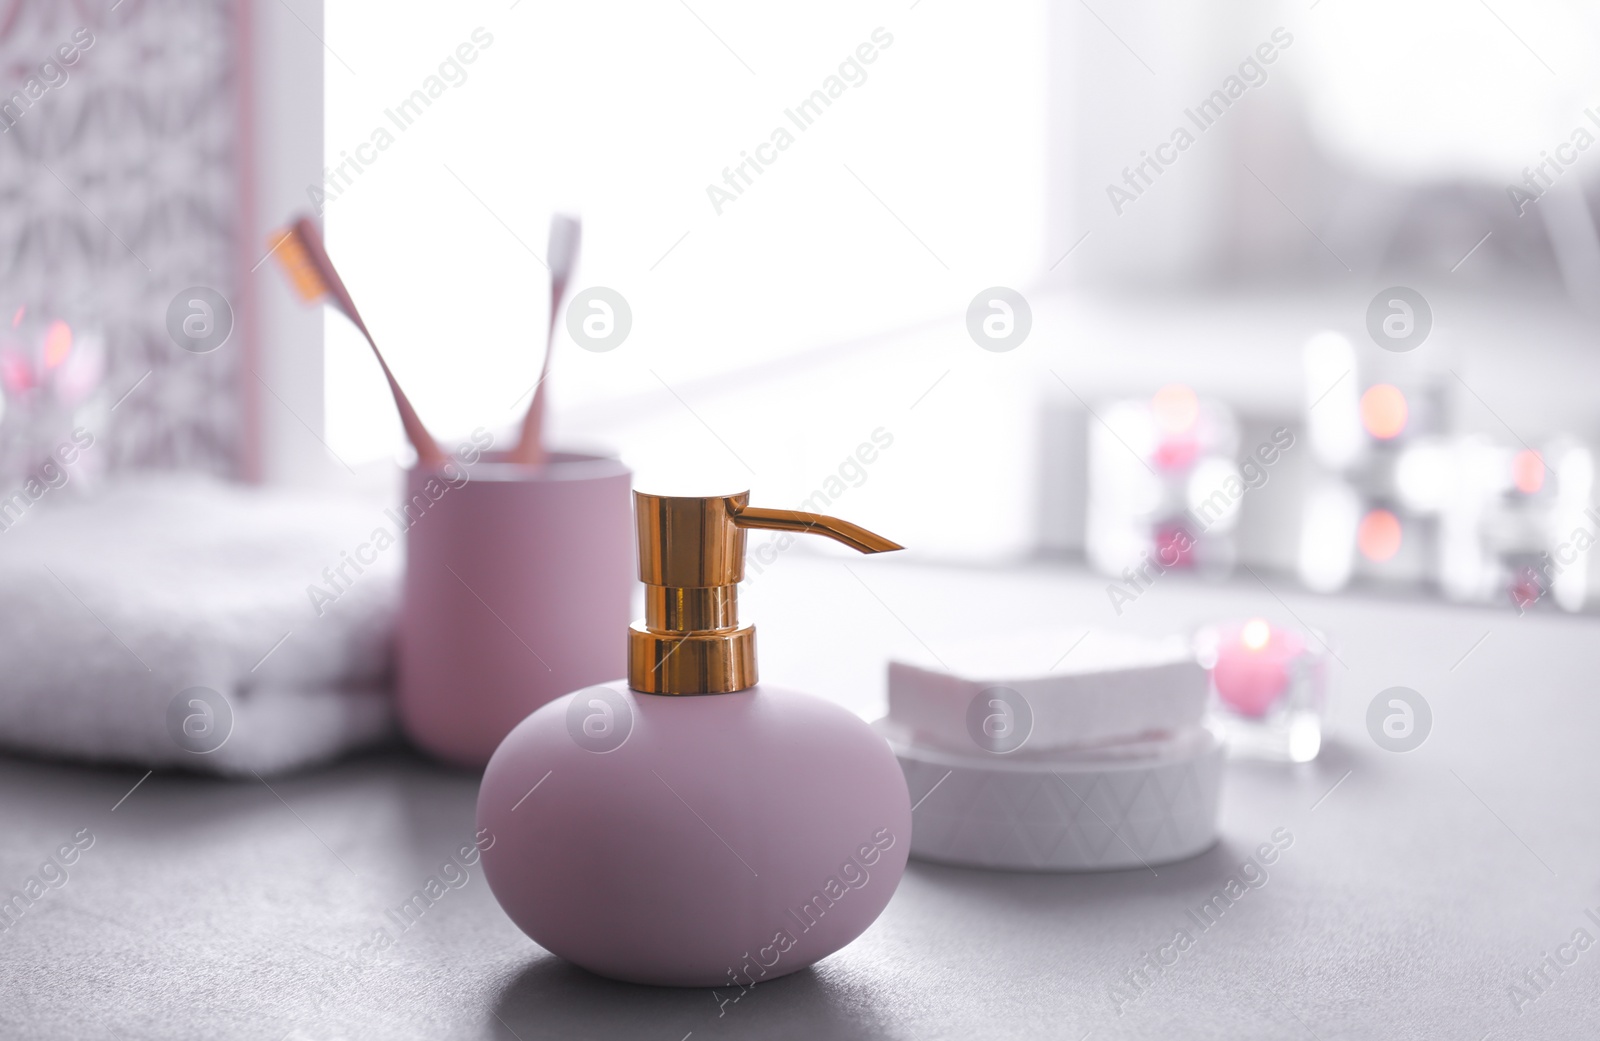 Photo of Bottle with liquid soap and toiletries on table against blurred background. Space for text